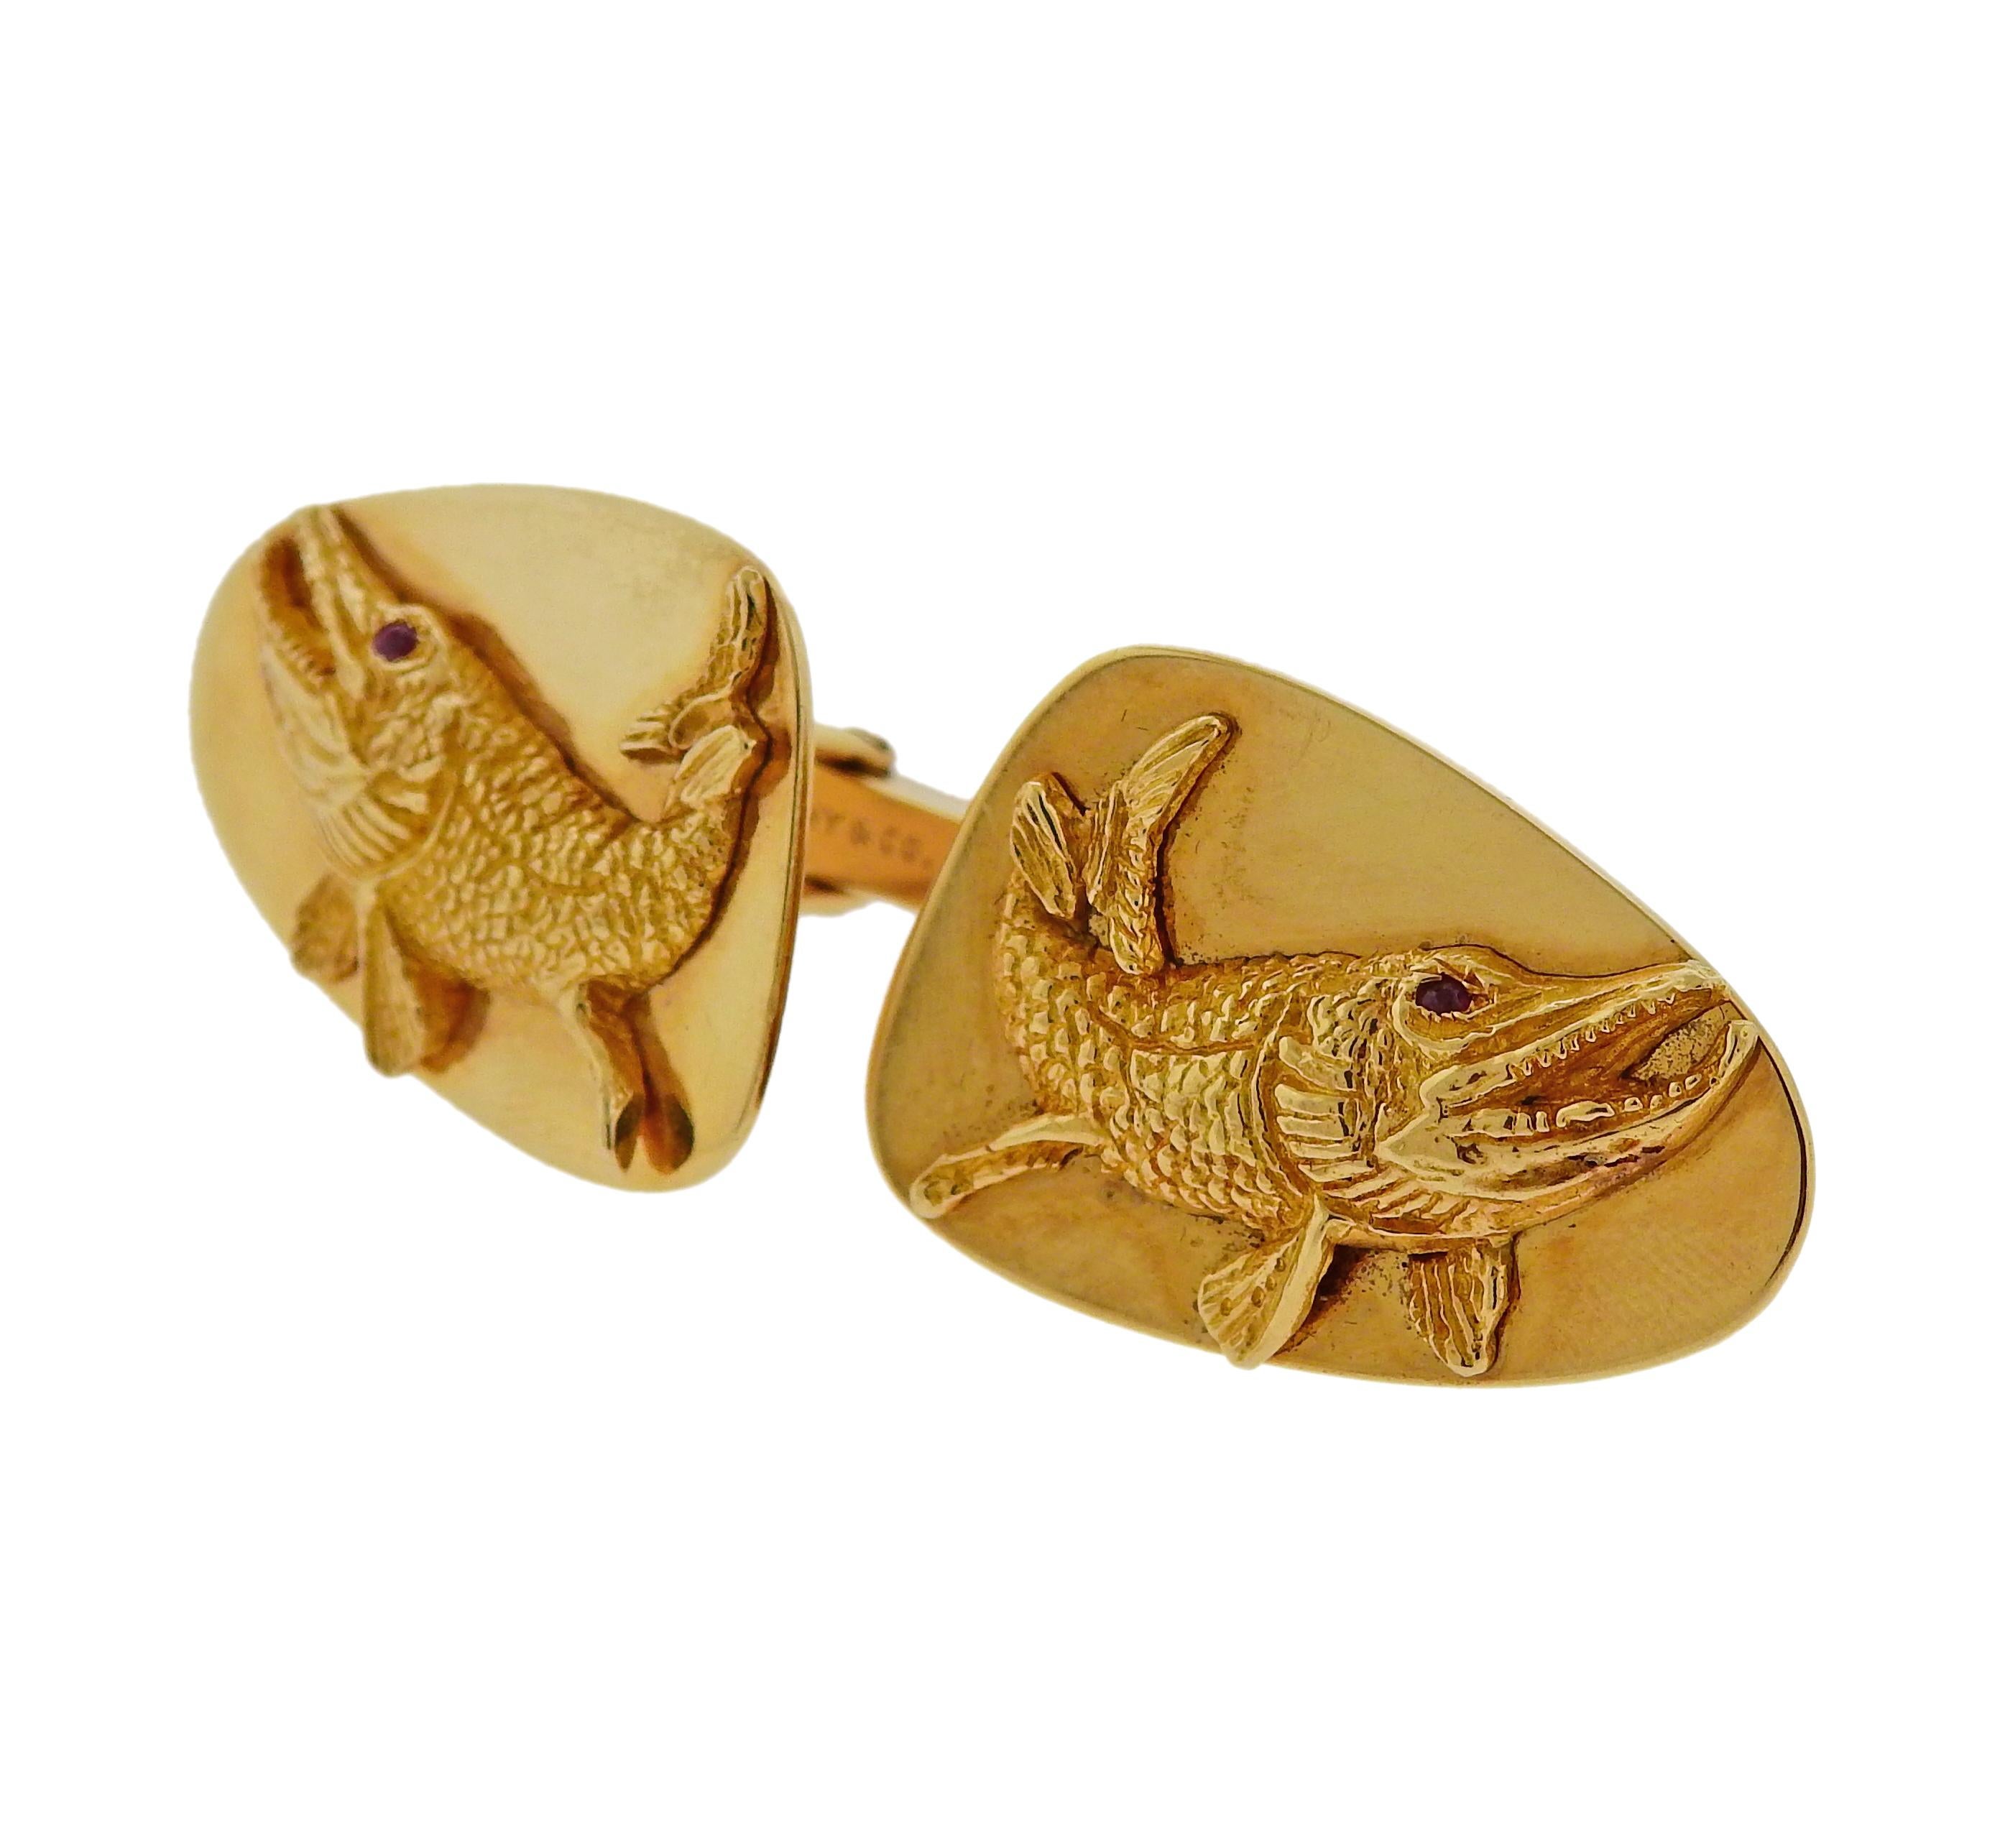 Pair of large 14k gold cufflinks by Tiffany & Co, depicting fish with ruby eyes. Each top measures 32mm x 22mm. Marked Tiffany & Co, 14k. Weigh 28.1 grams.

SKU#C-00155